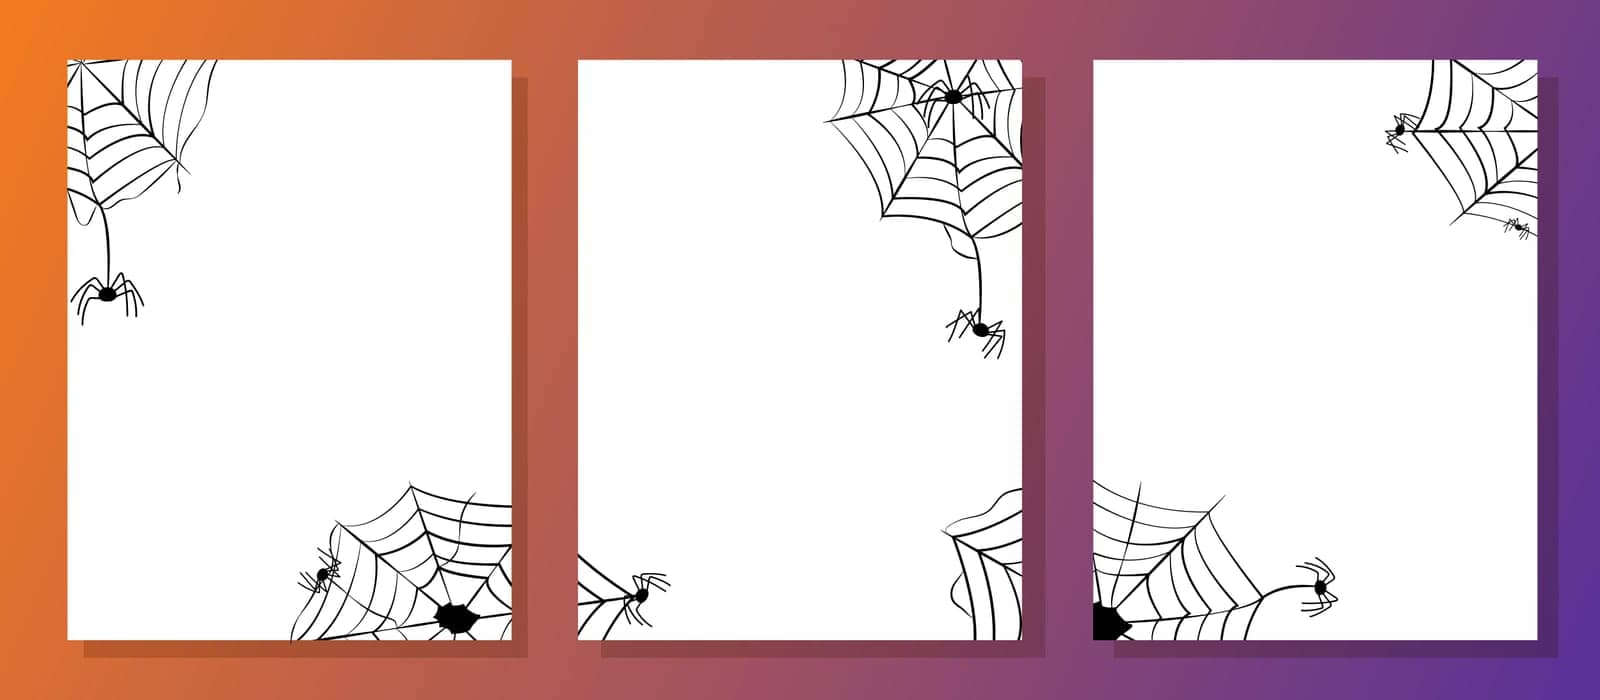 Set of banner designs for Happy Halloween cobwebs and spiders. White templates on orange gradient background. Vector congratulations, invitations, posters.